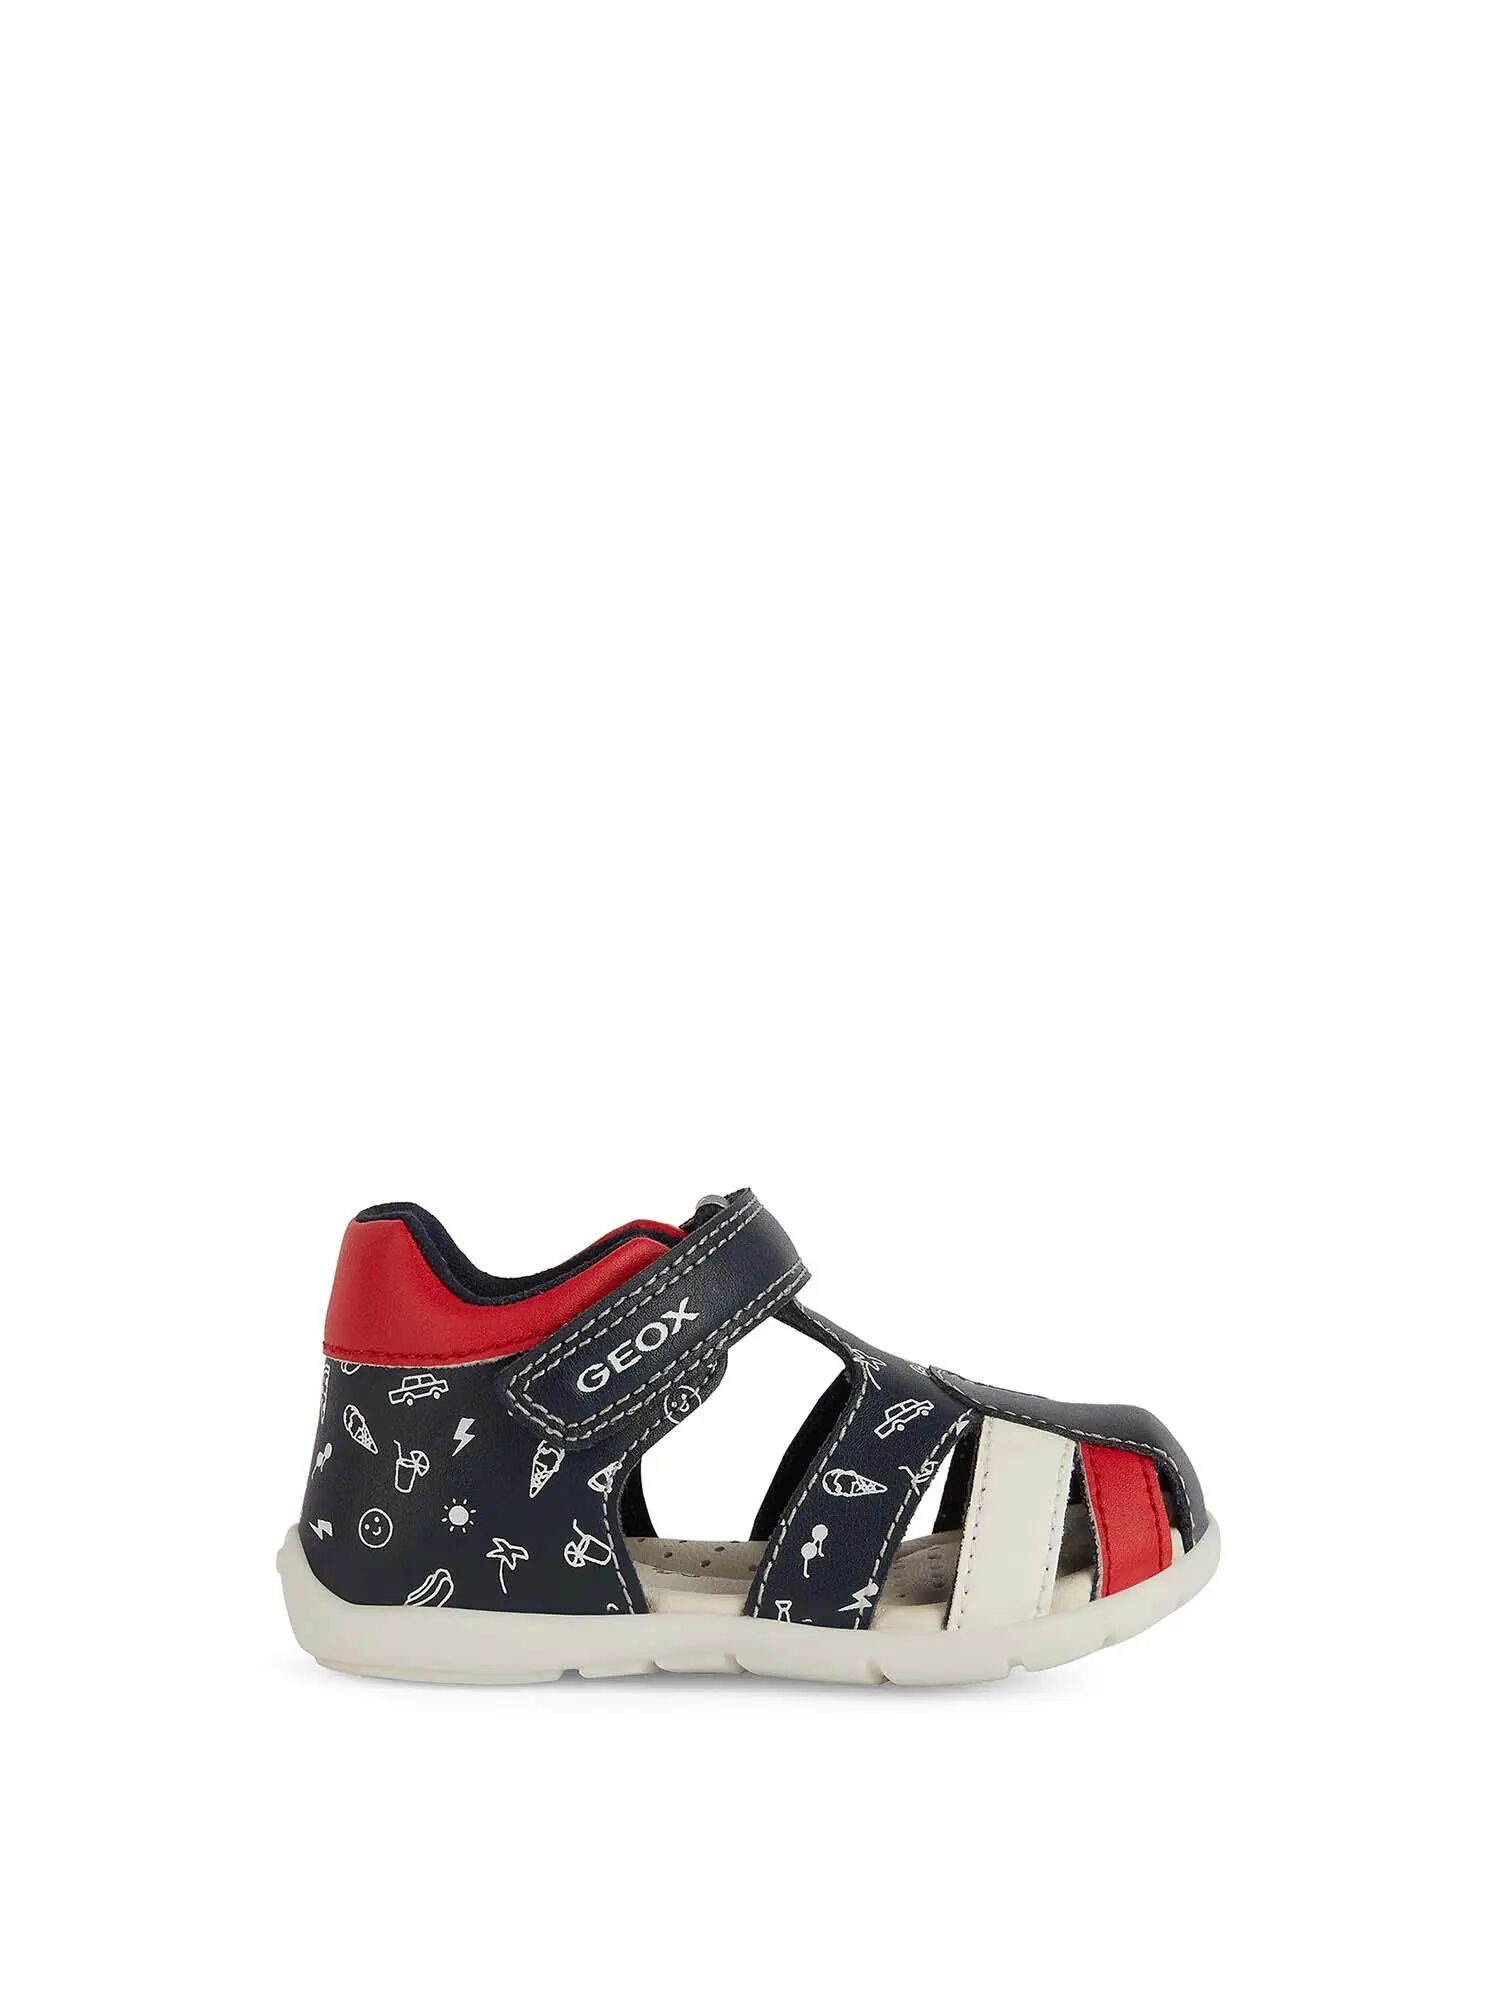 Geox Ragnetto Bambino Colore Navy/rosso NAVY/ROSSO 19